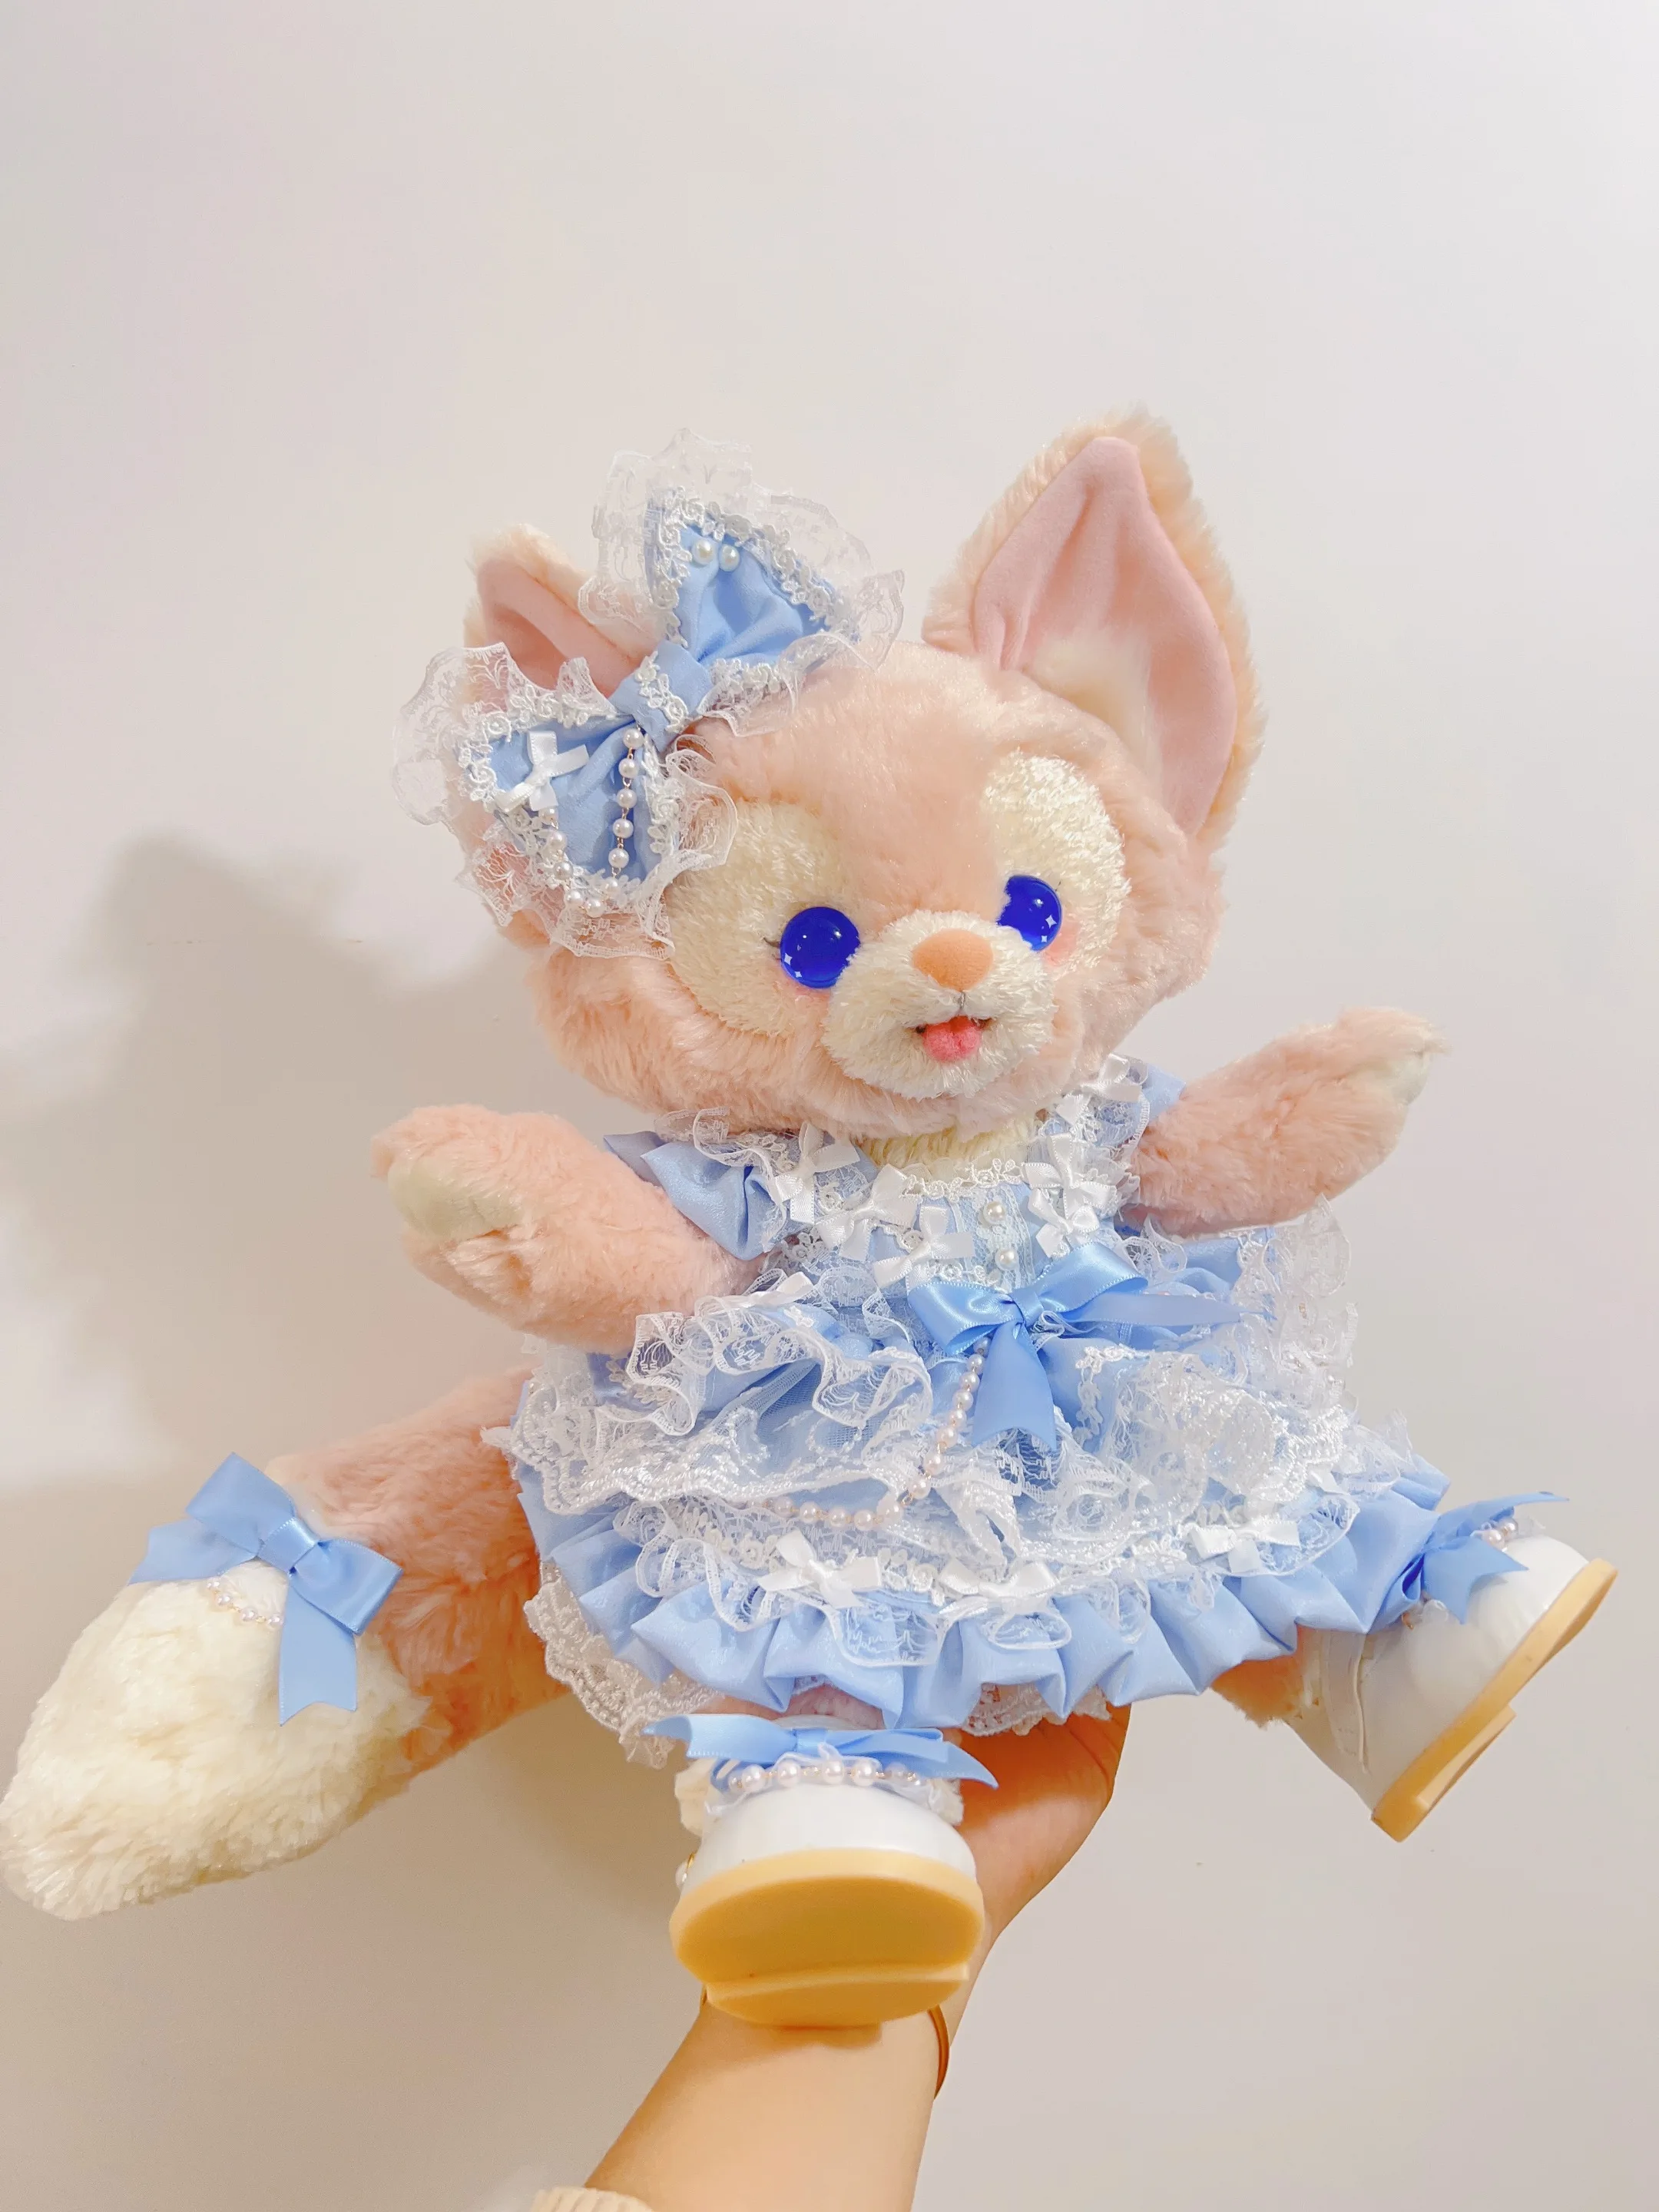 Duffy's Friend 13 Inch S LinaBell and StellaLou Plush Doll Clothes Blue Pearl Princess Dress Court Style Wedding Dress